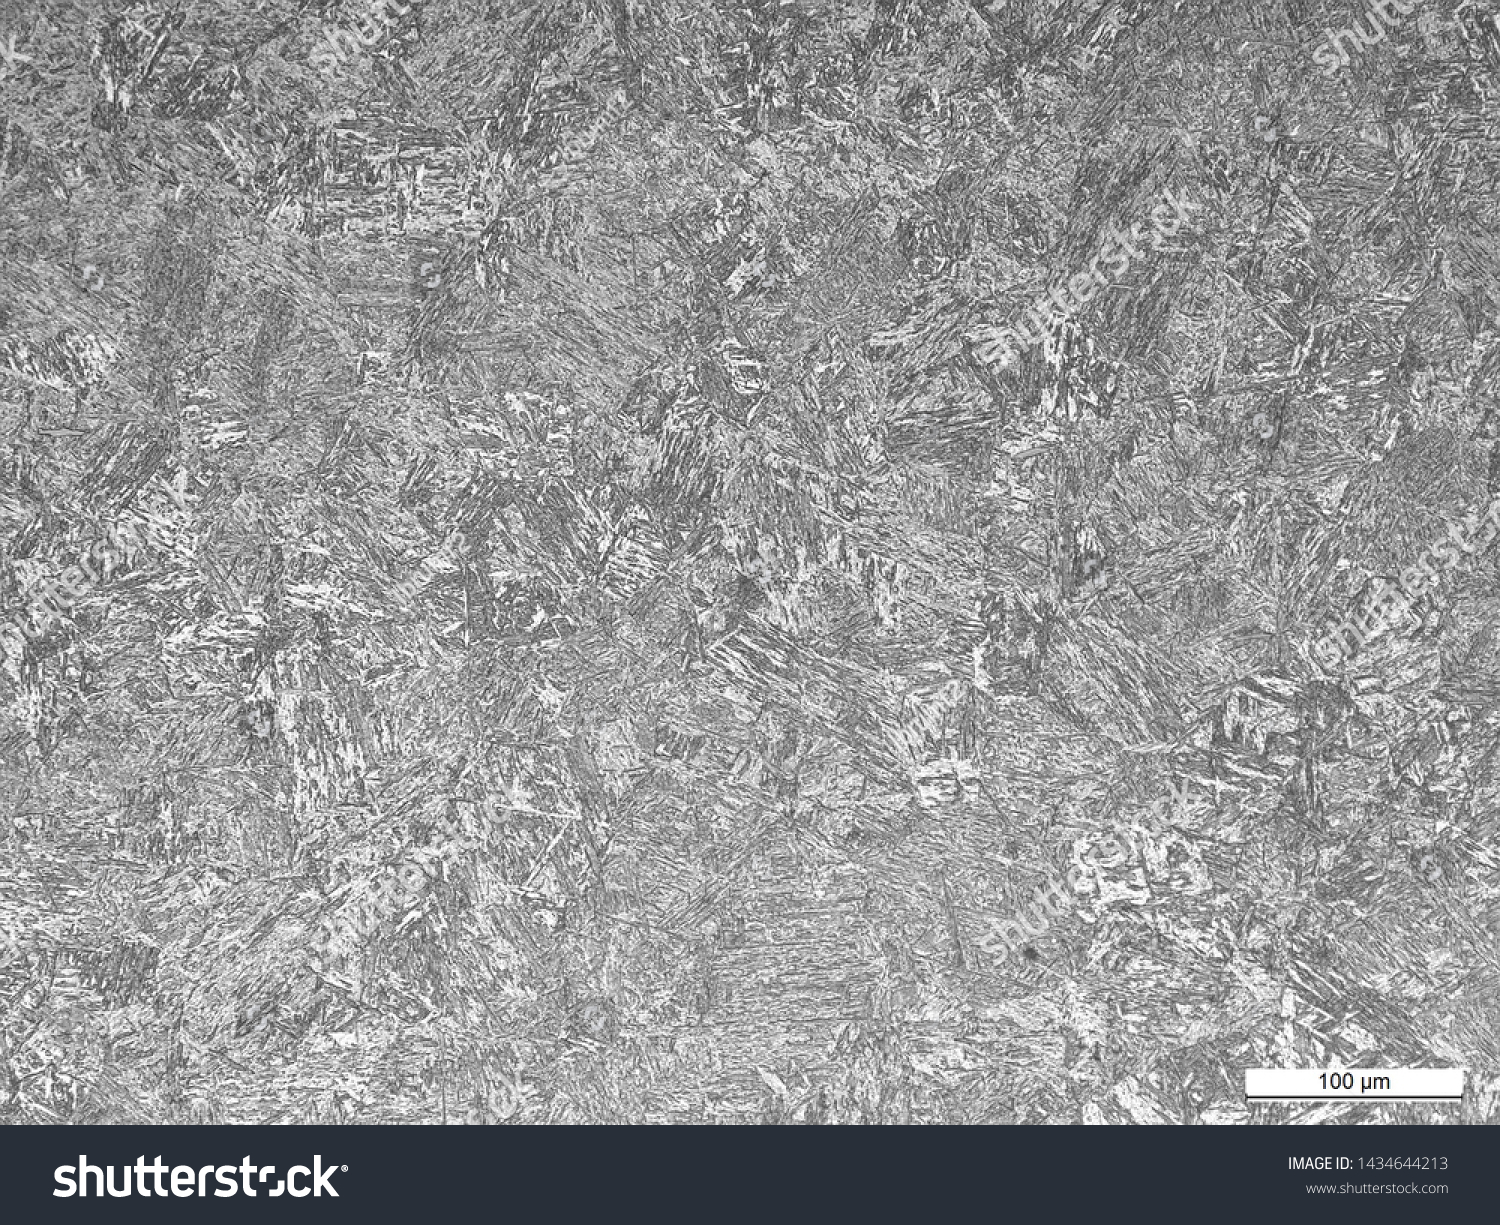 Microstructure of steel toe insert at carburized and non-carburized regions showing martensite and tempered martensite. Etched w/ 2% nital #1434644213